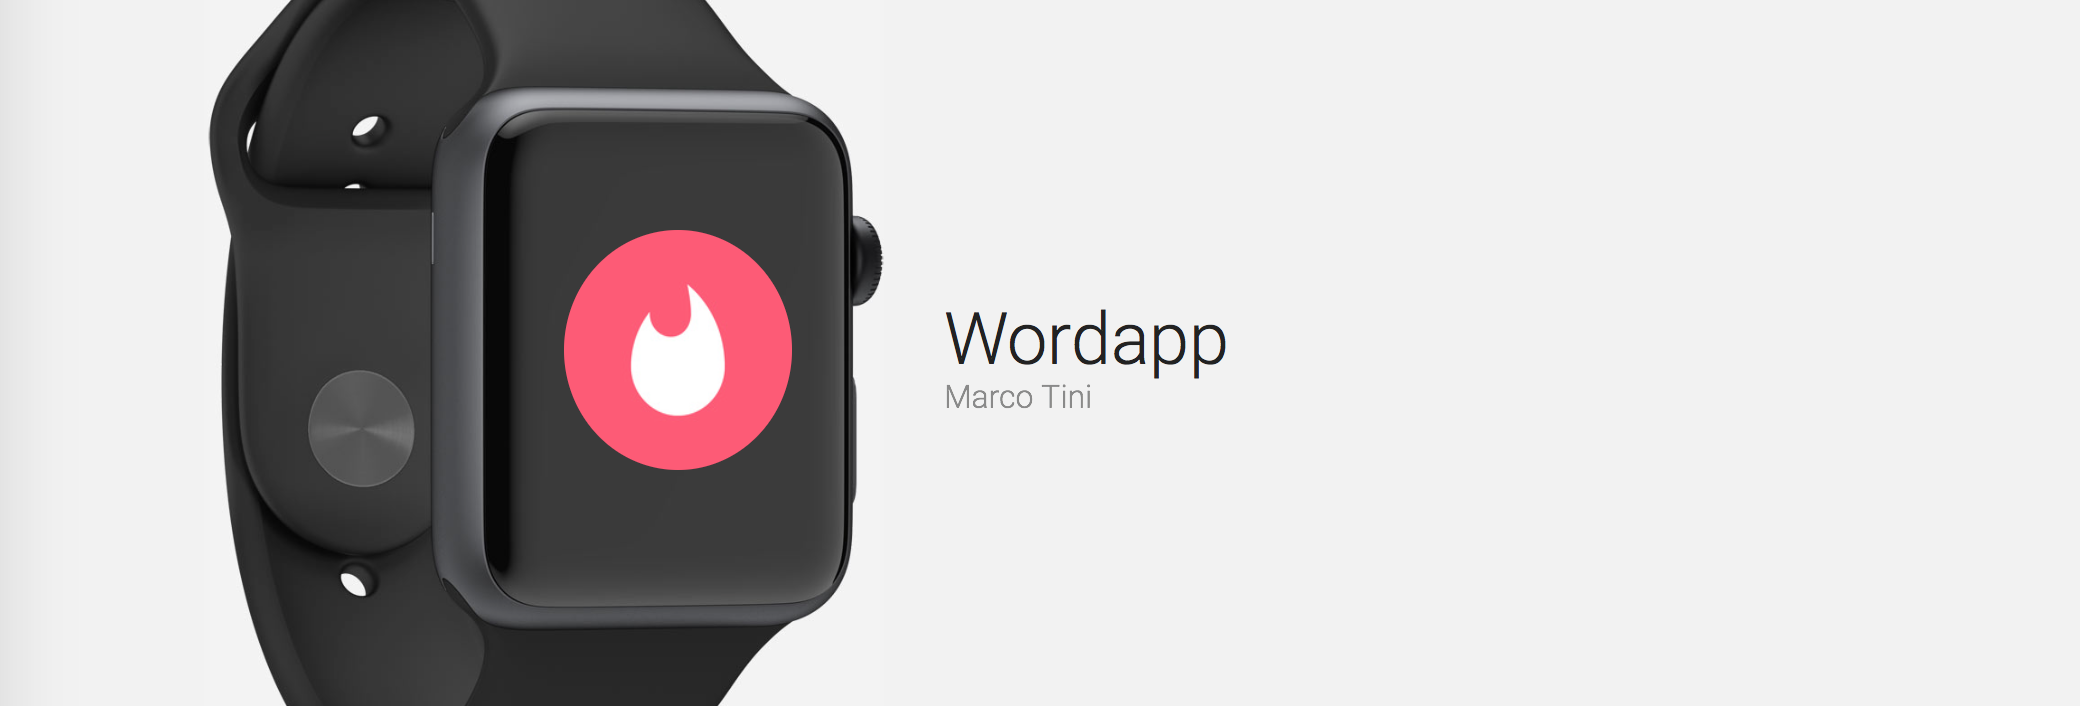 Learn a new word each and every day with Wordapp for Apple Watch